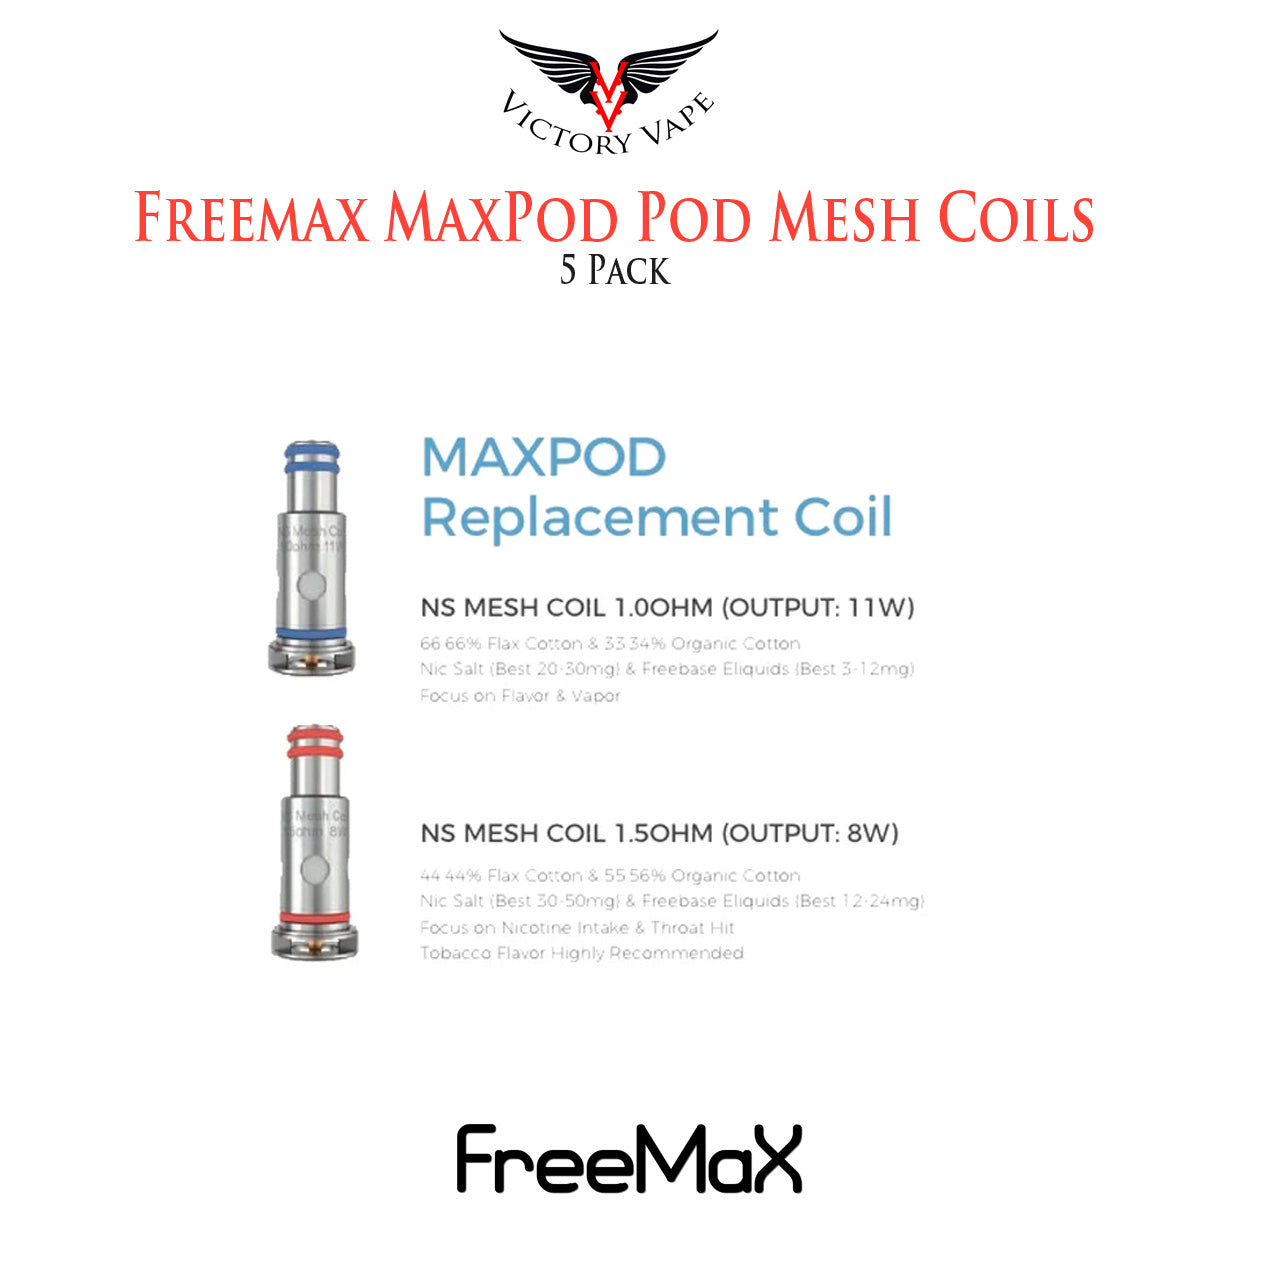  Freemax MaxPod Replacement Mesh Coils • 5 Pack 